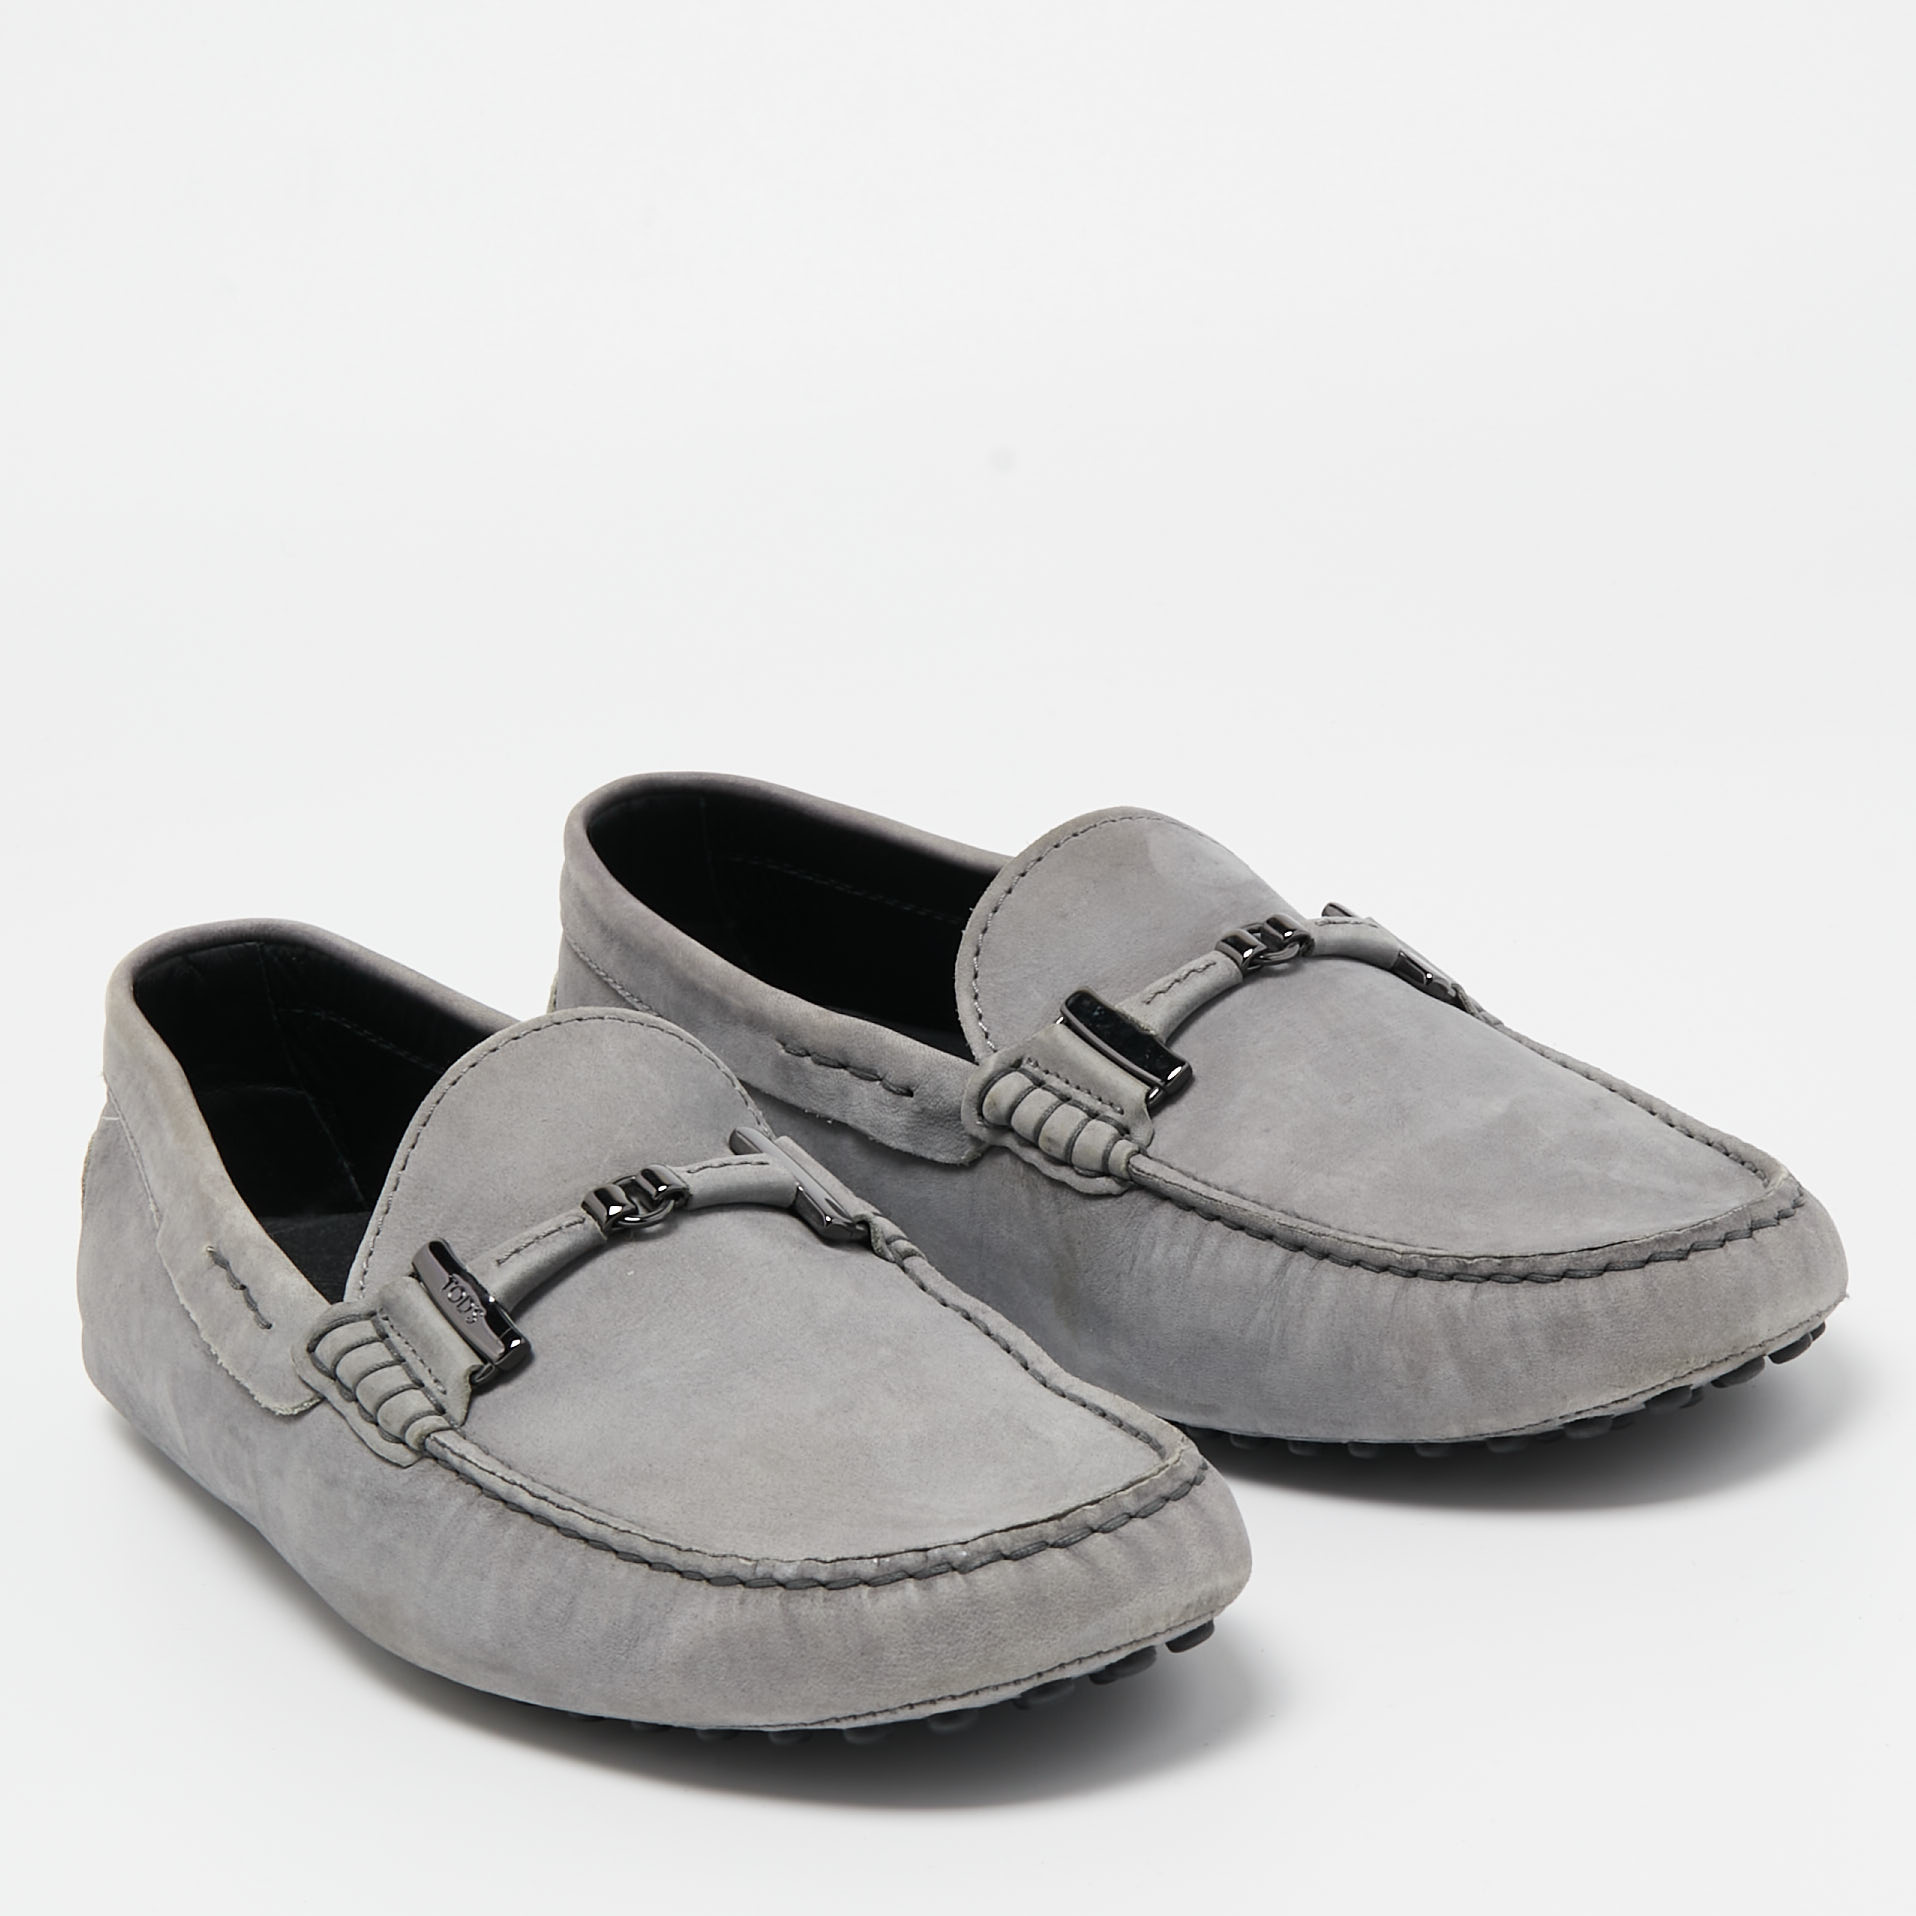 Tod's Grey Nubuck Leather Slip On Loafers Size 43